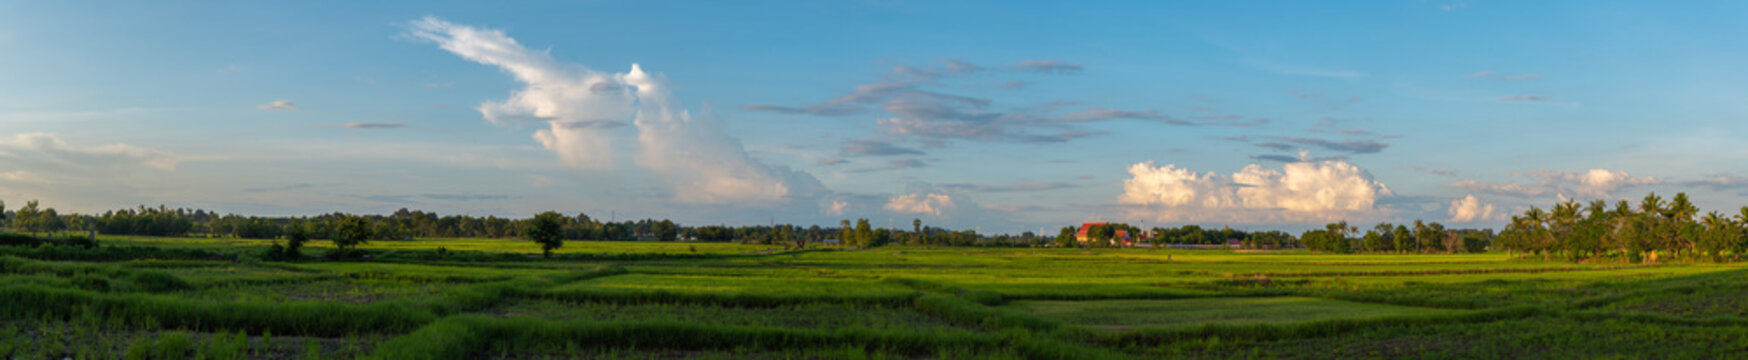 Panorama, green fields and temples in the fields at sunset